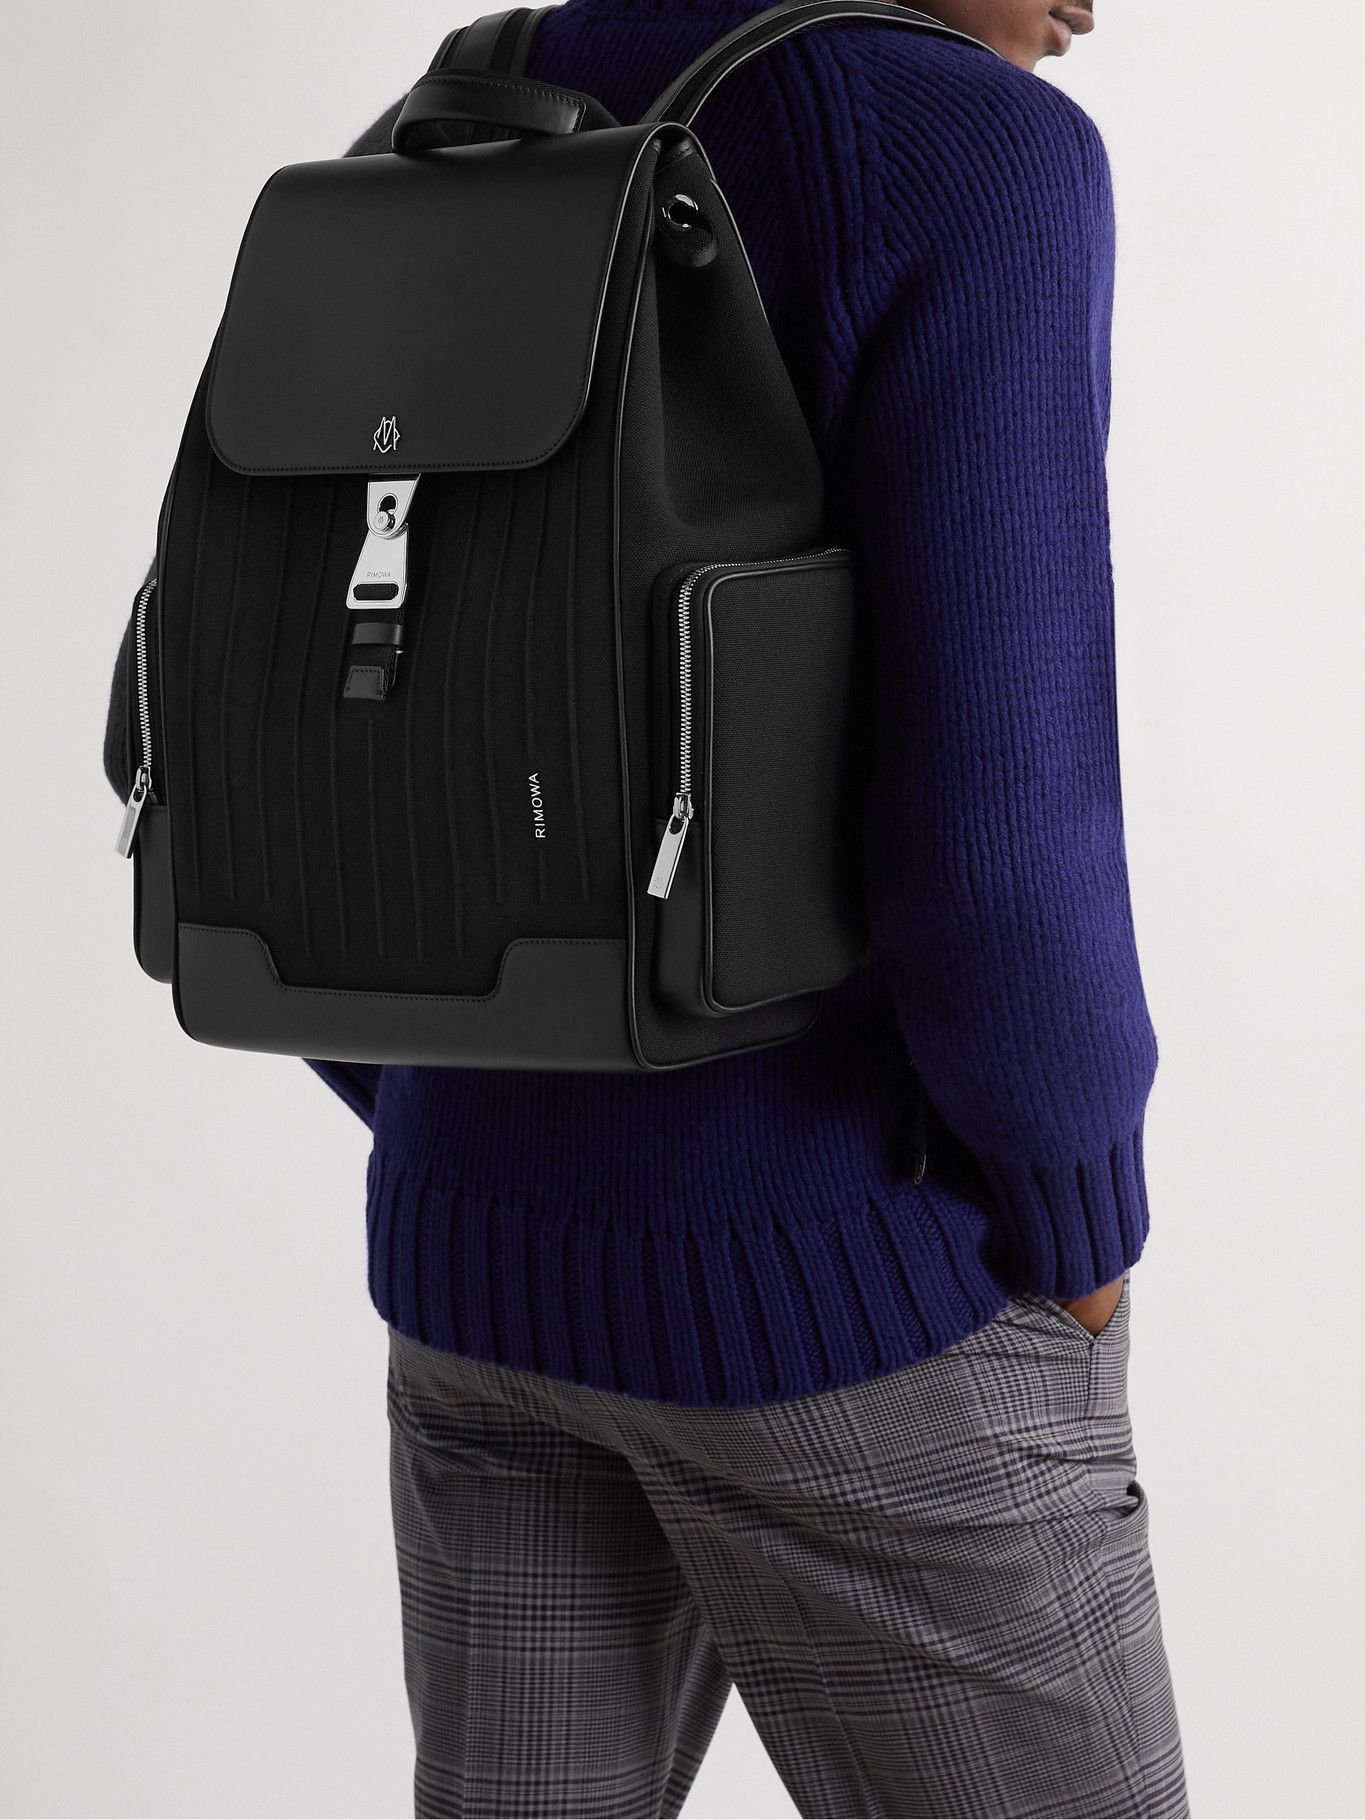 RIMOWA - Leather-Trimmed Canvas Backpack RIMOWA